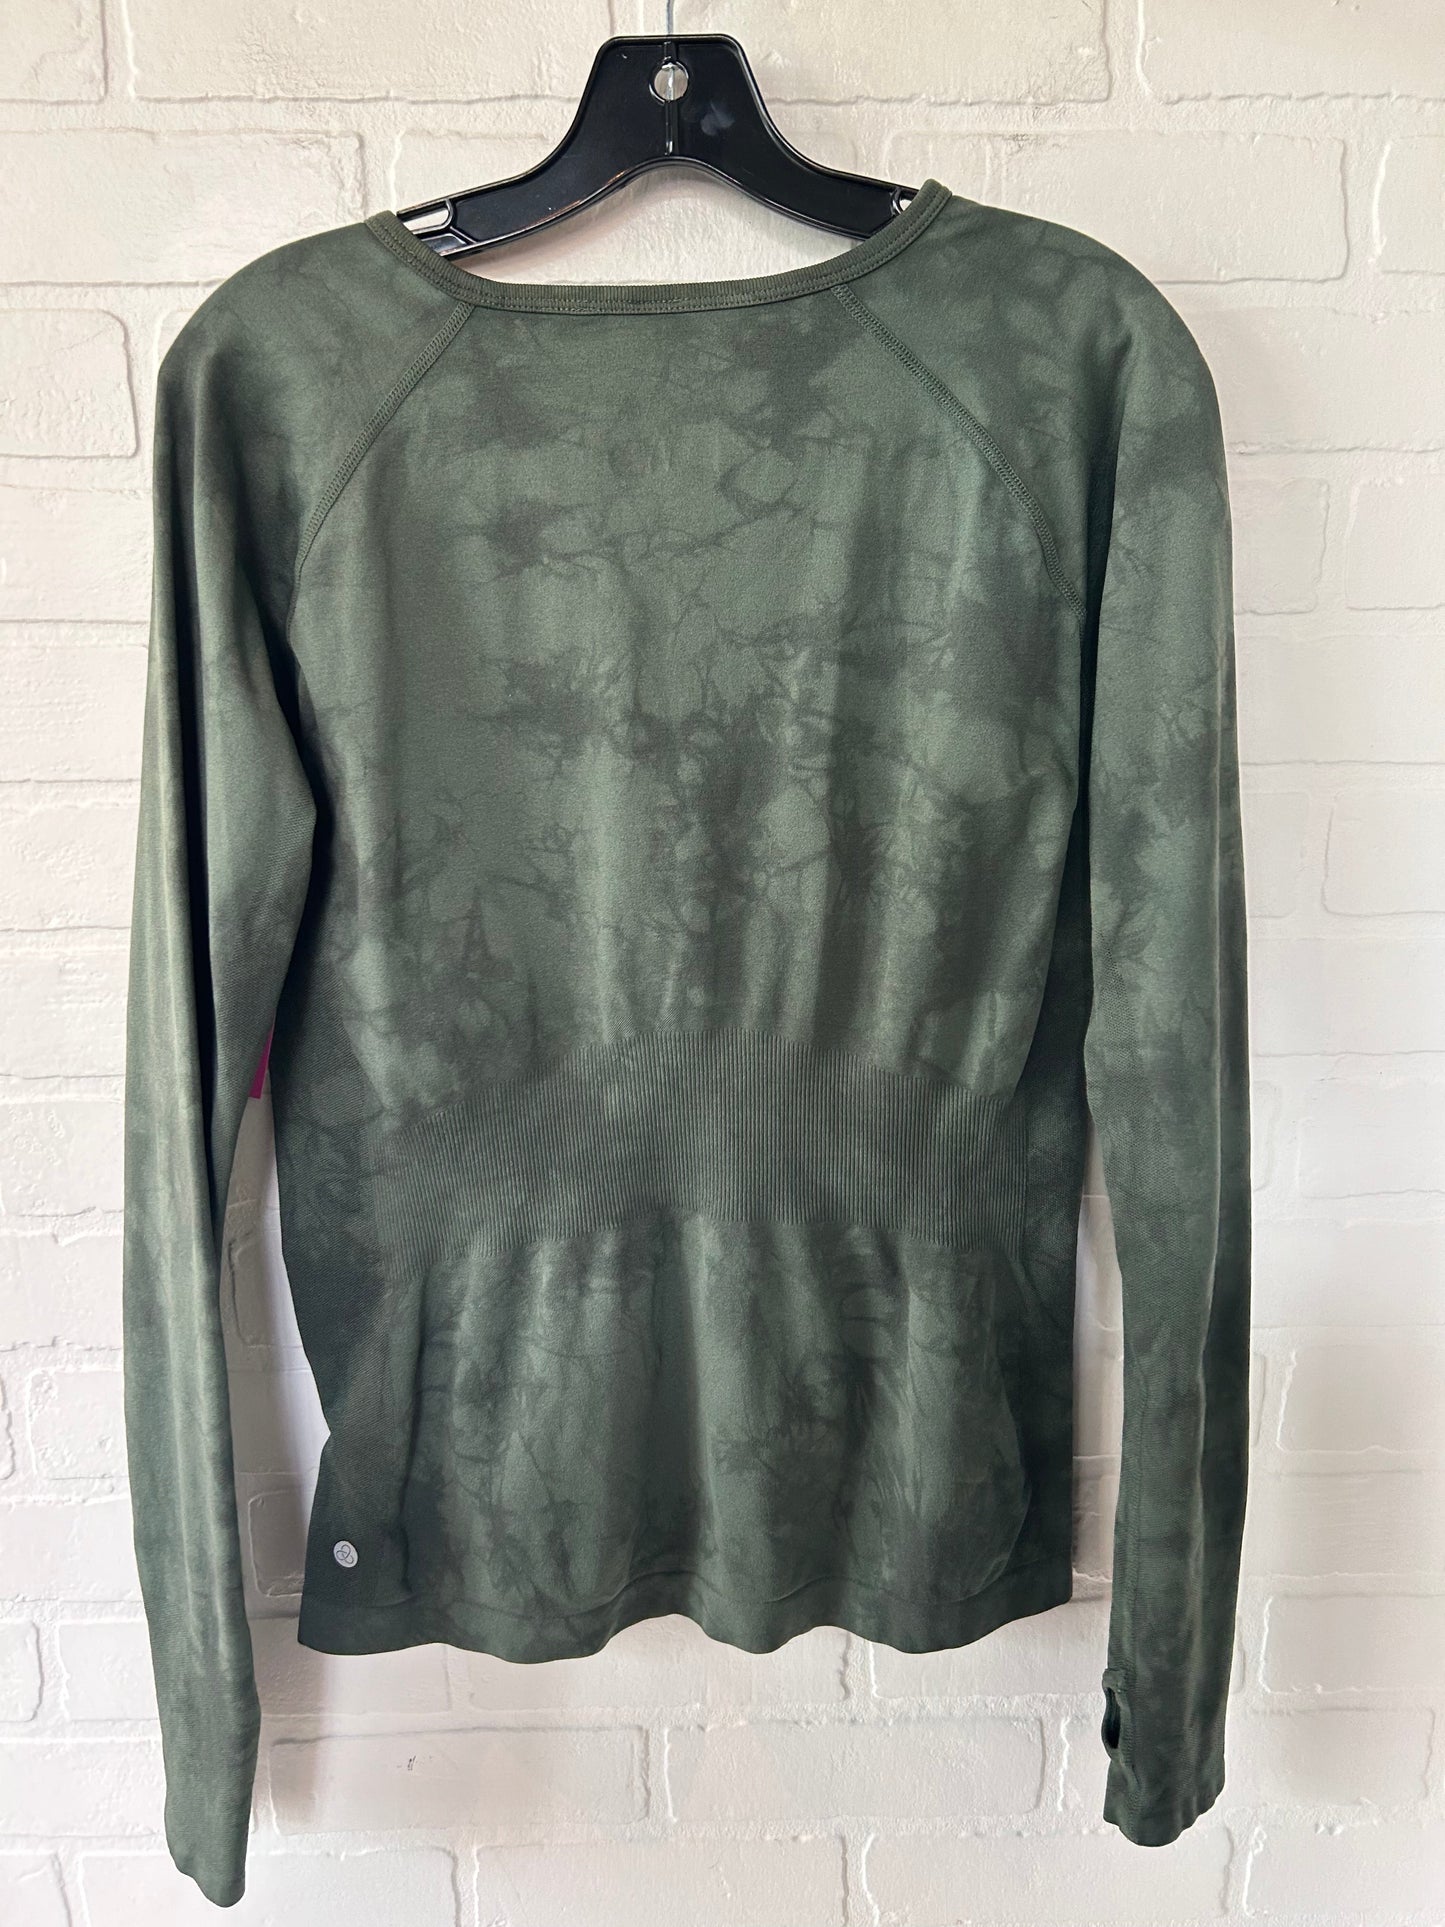 Athletic Top Long Sleeve Crewneck By Zella  Size: L